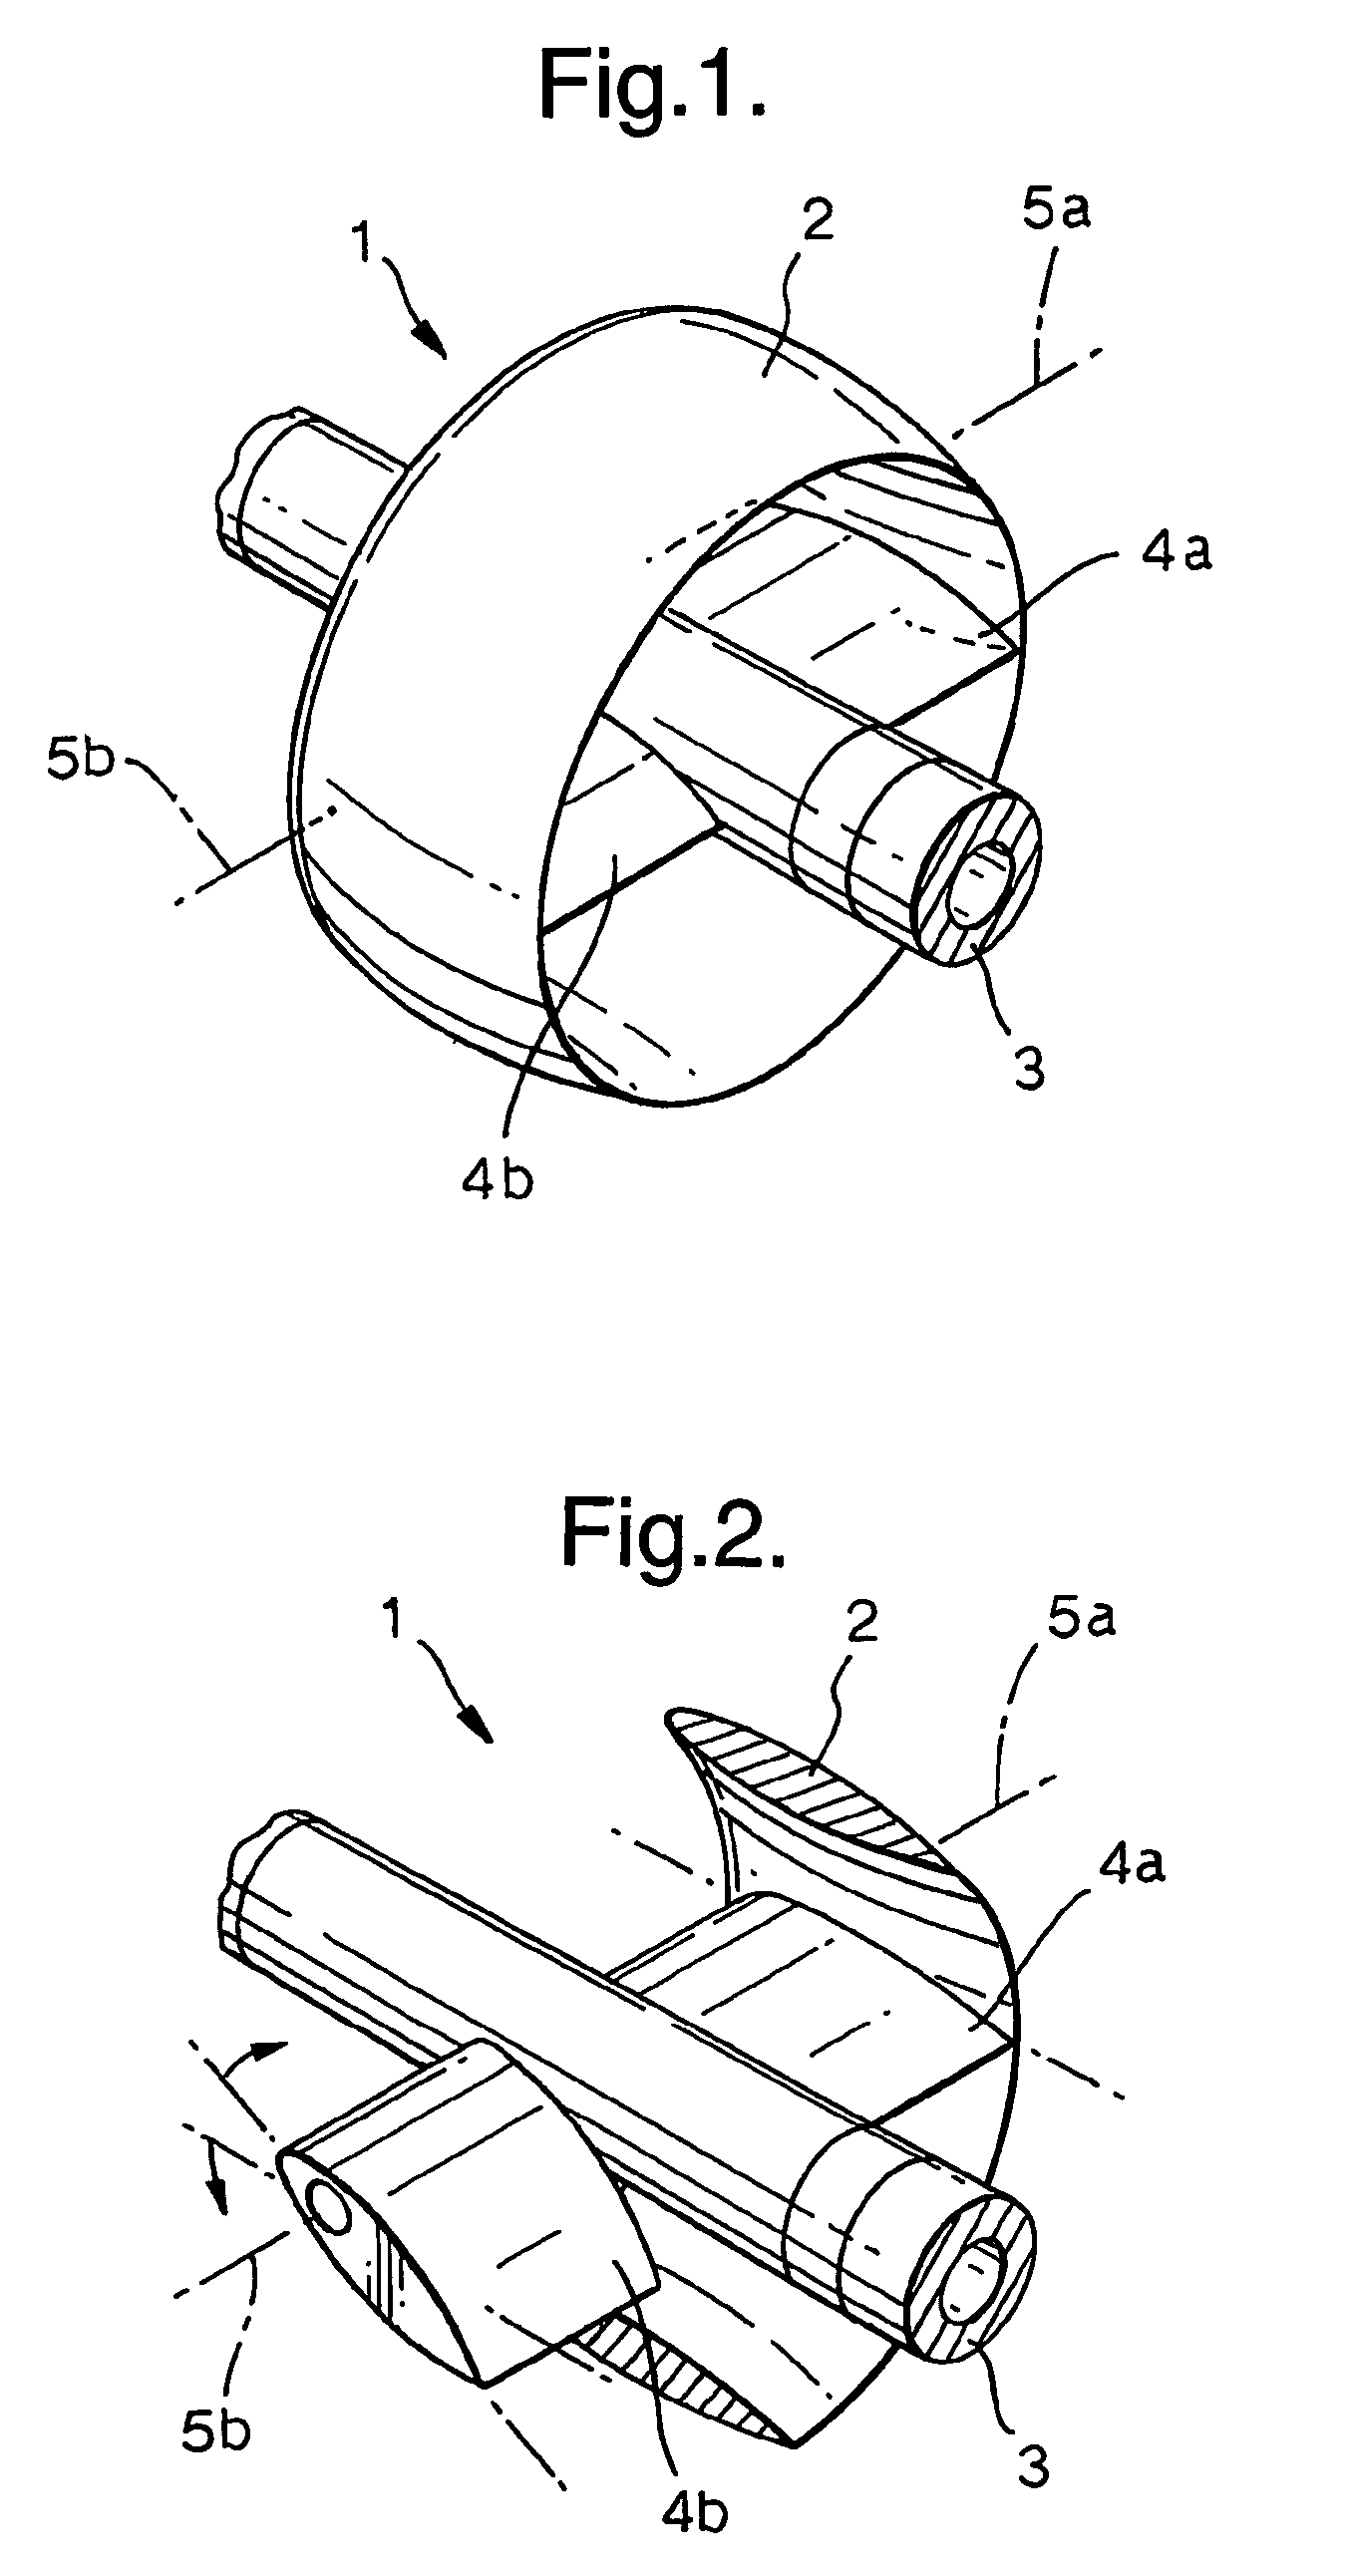 Control device for controlling the position of a marine seismic streamer